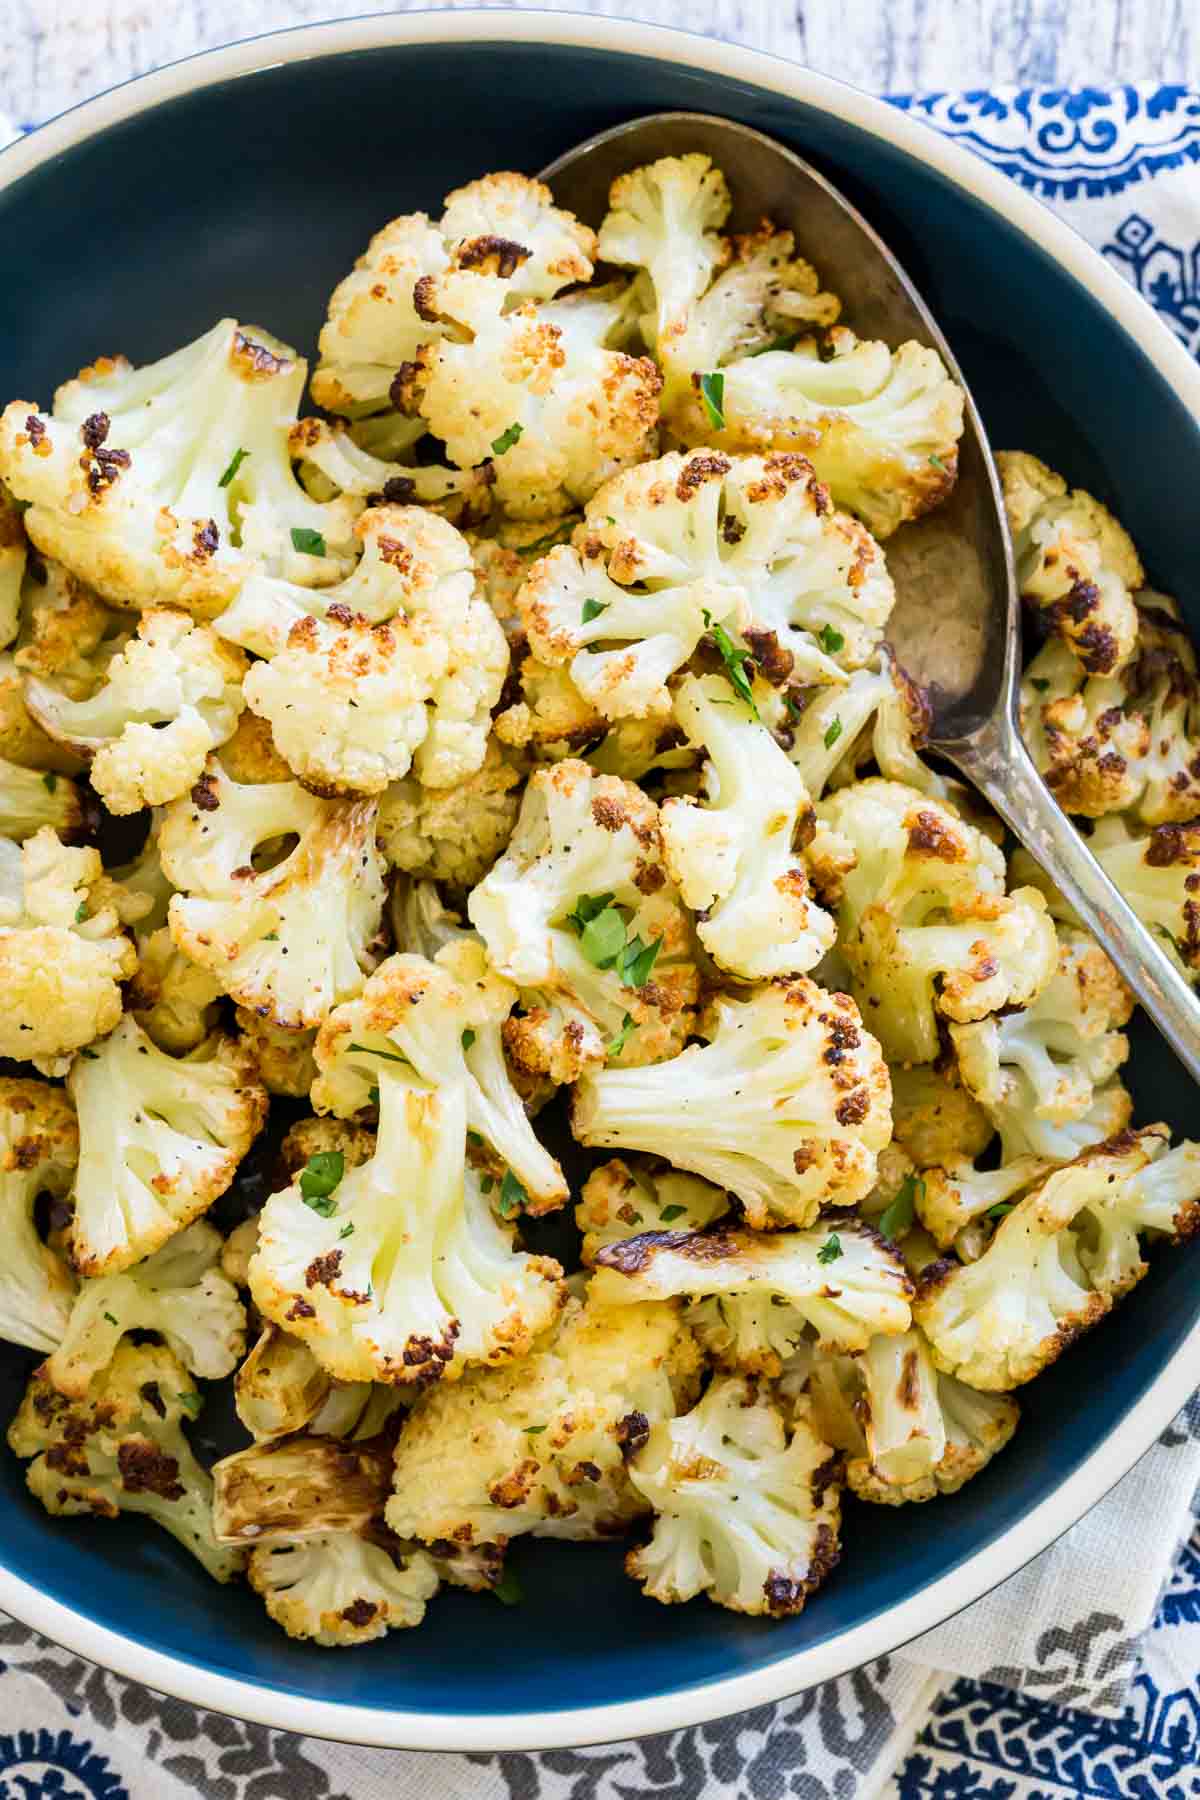 A bowl of roasted cauliflower with a spoon.